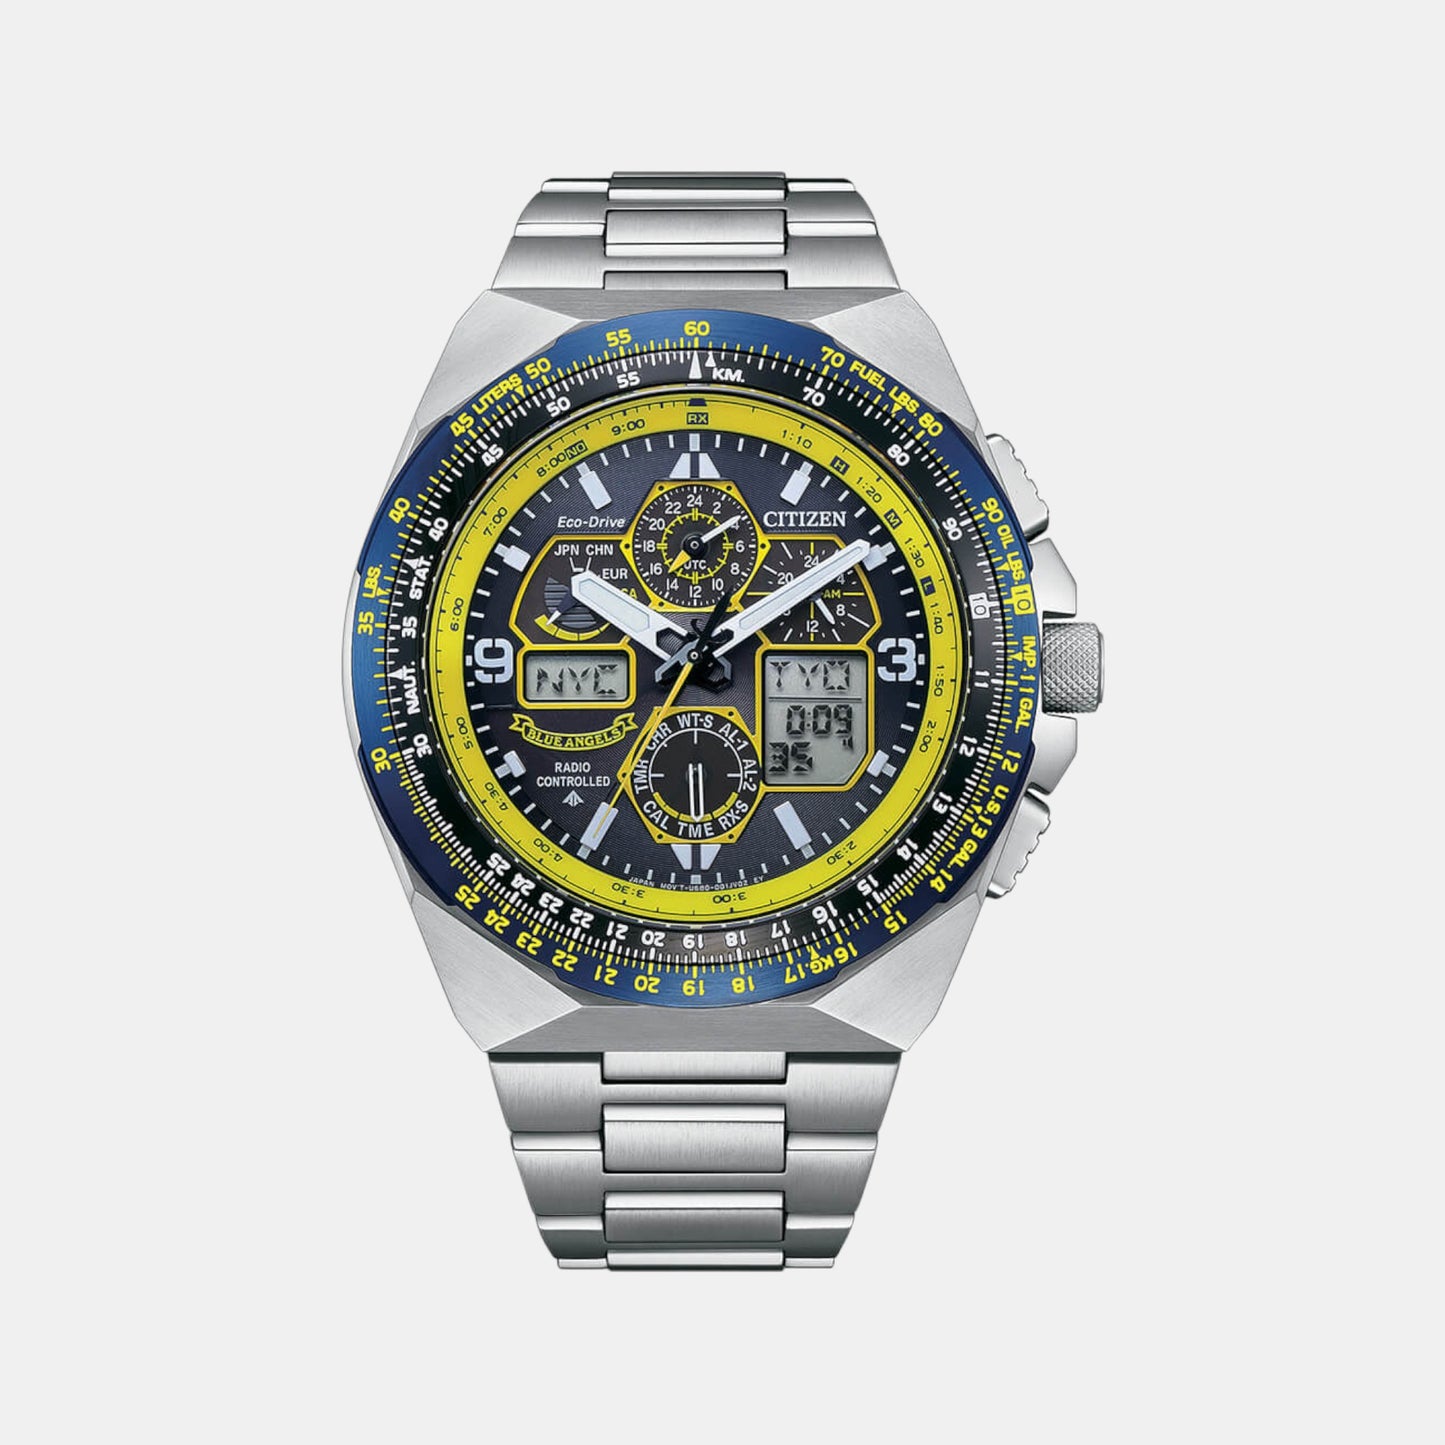 Male Stainless Steel Chronograph Watch JY8125-54L